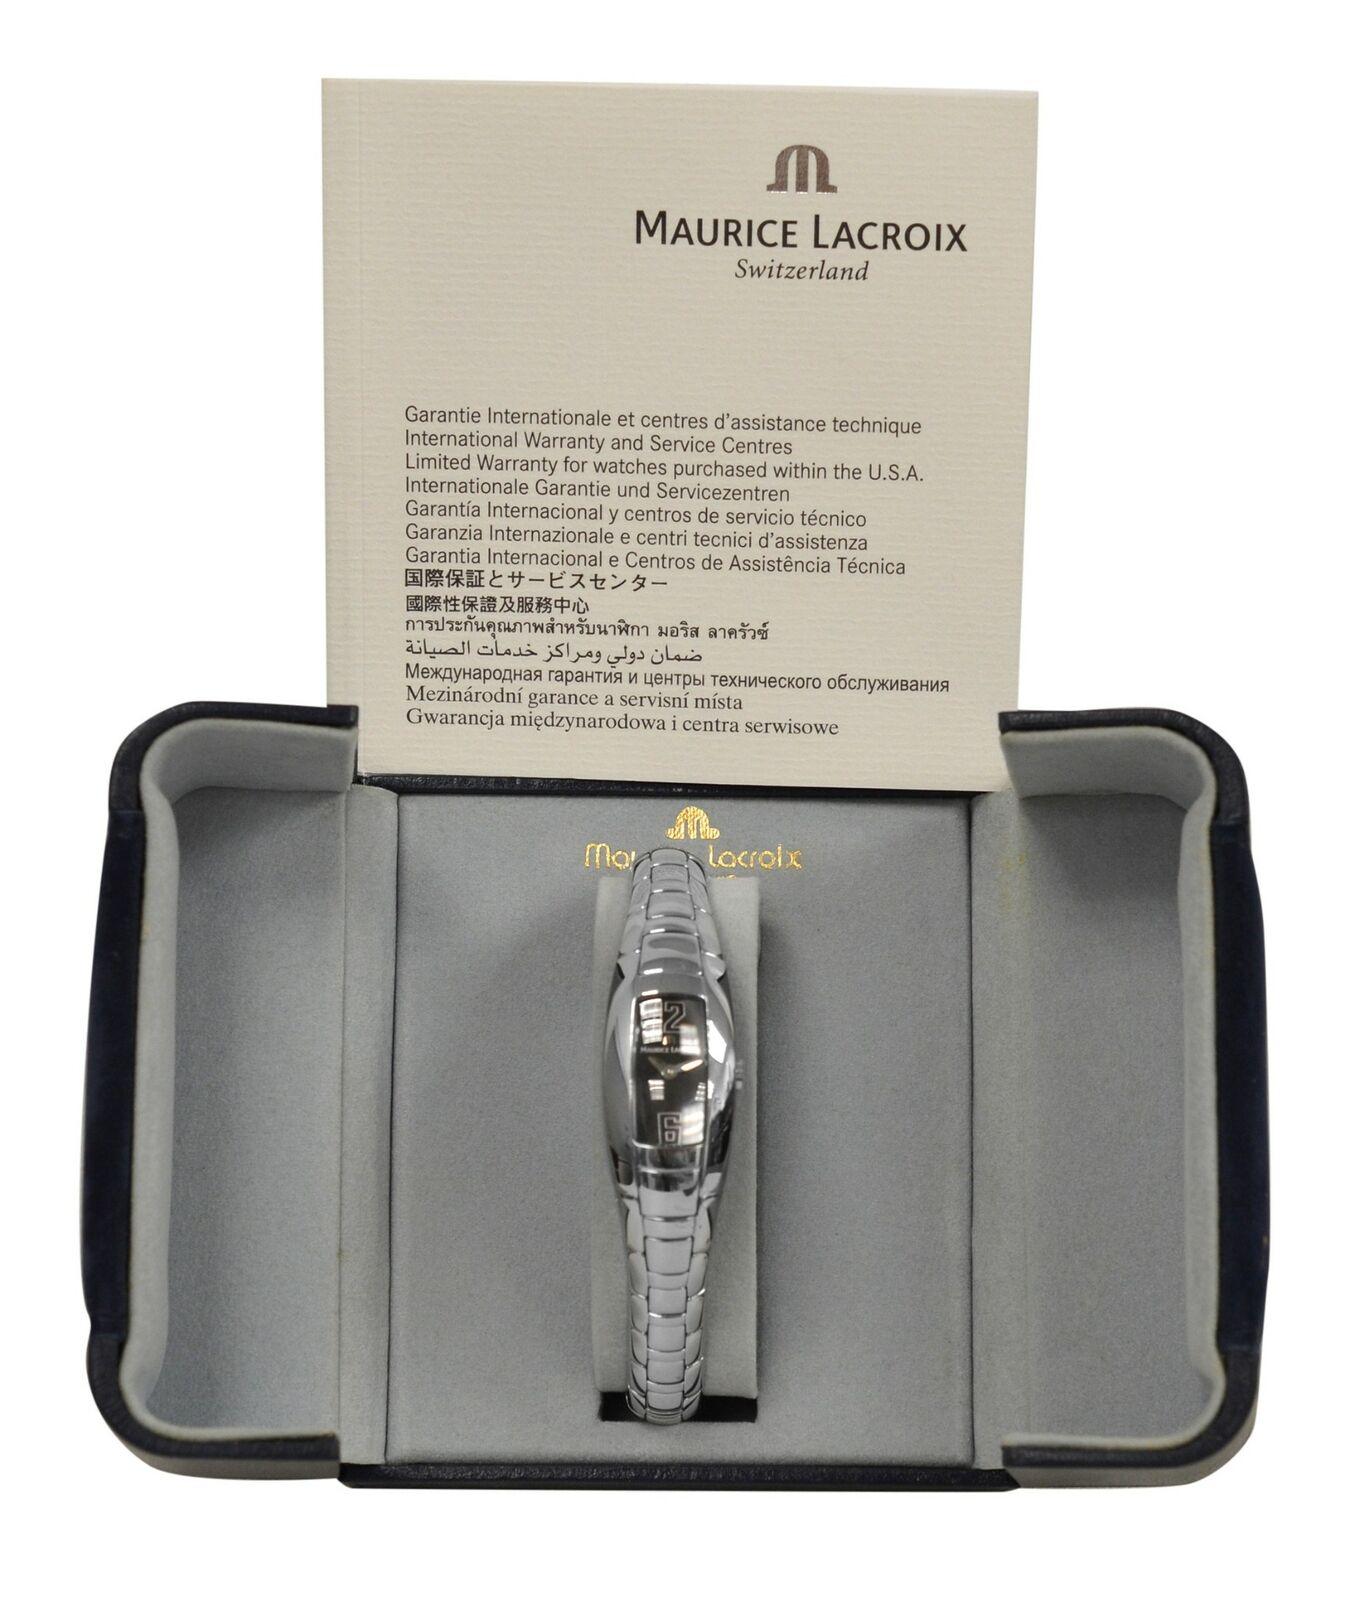 Brand	Maurice Lacroix
Model	Intuition IN3012-SS002-320
Gender	Ladies
Condition	New Old Stock Store Display 
Movement	Quartz
Case Material	Stainless Steel
Bracelet / Strap Material	Stainless Steel 
Clasp / Buckle Material	Stainless Steel
Clasp